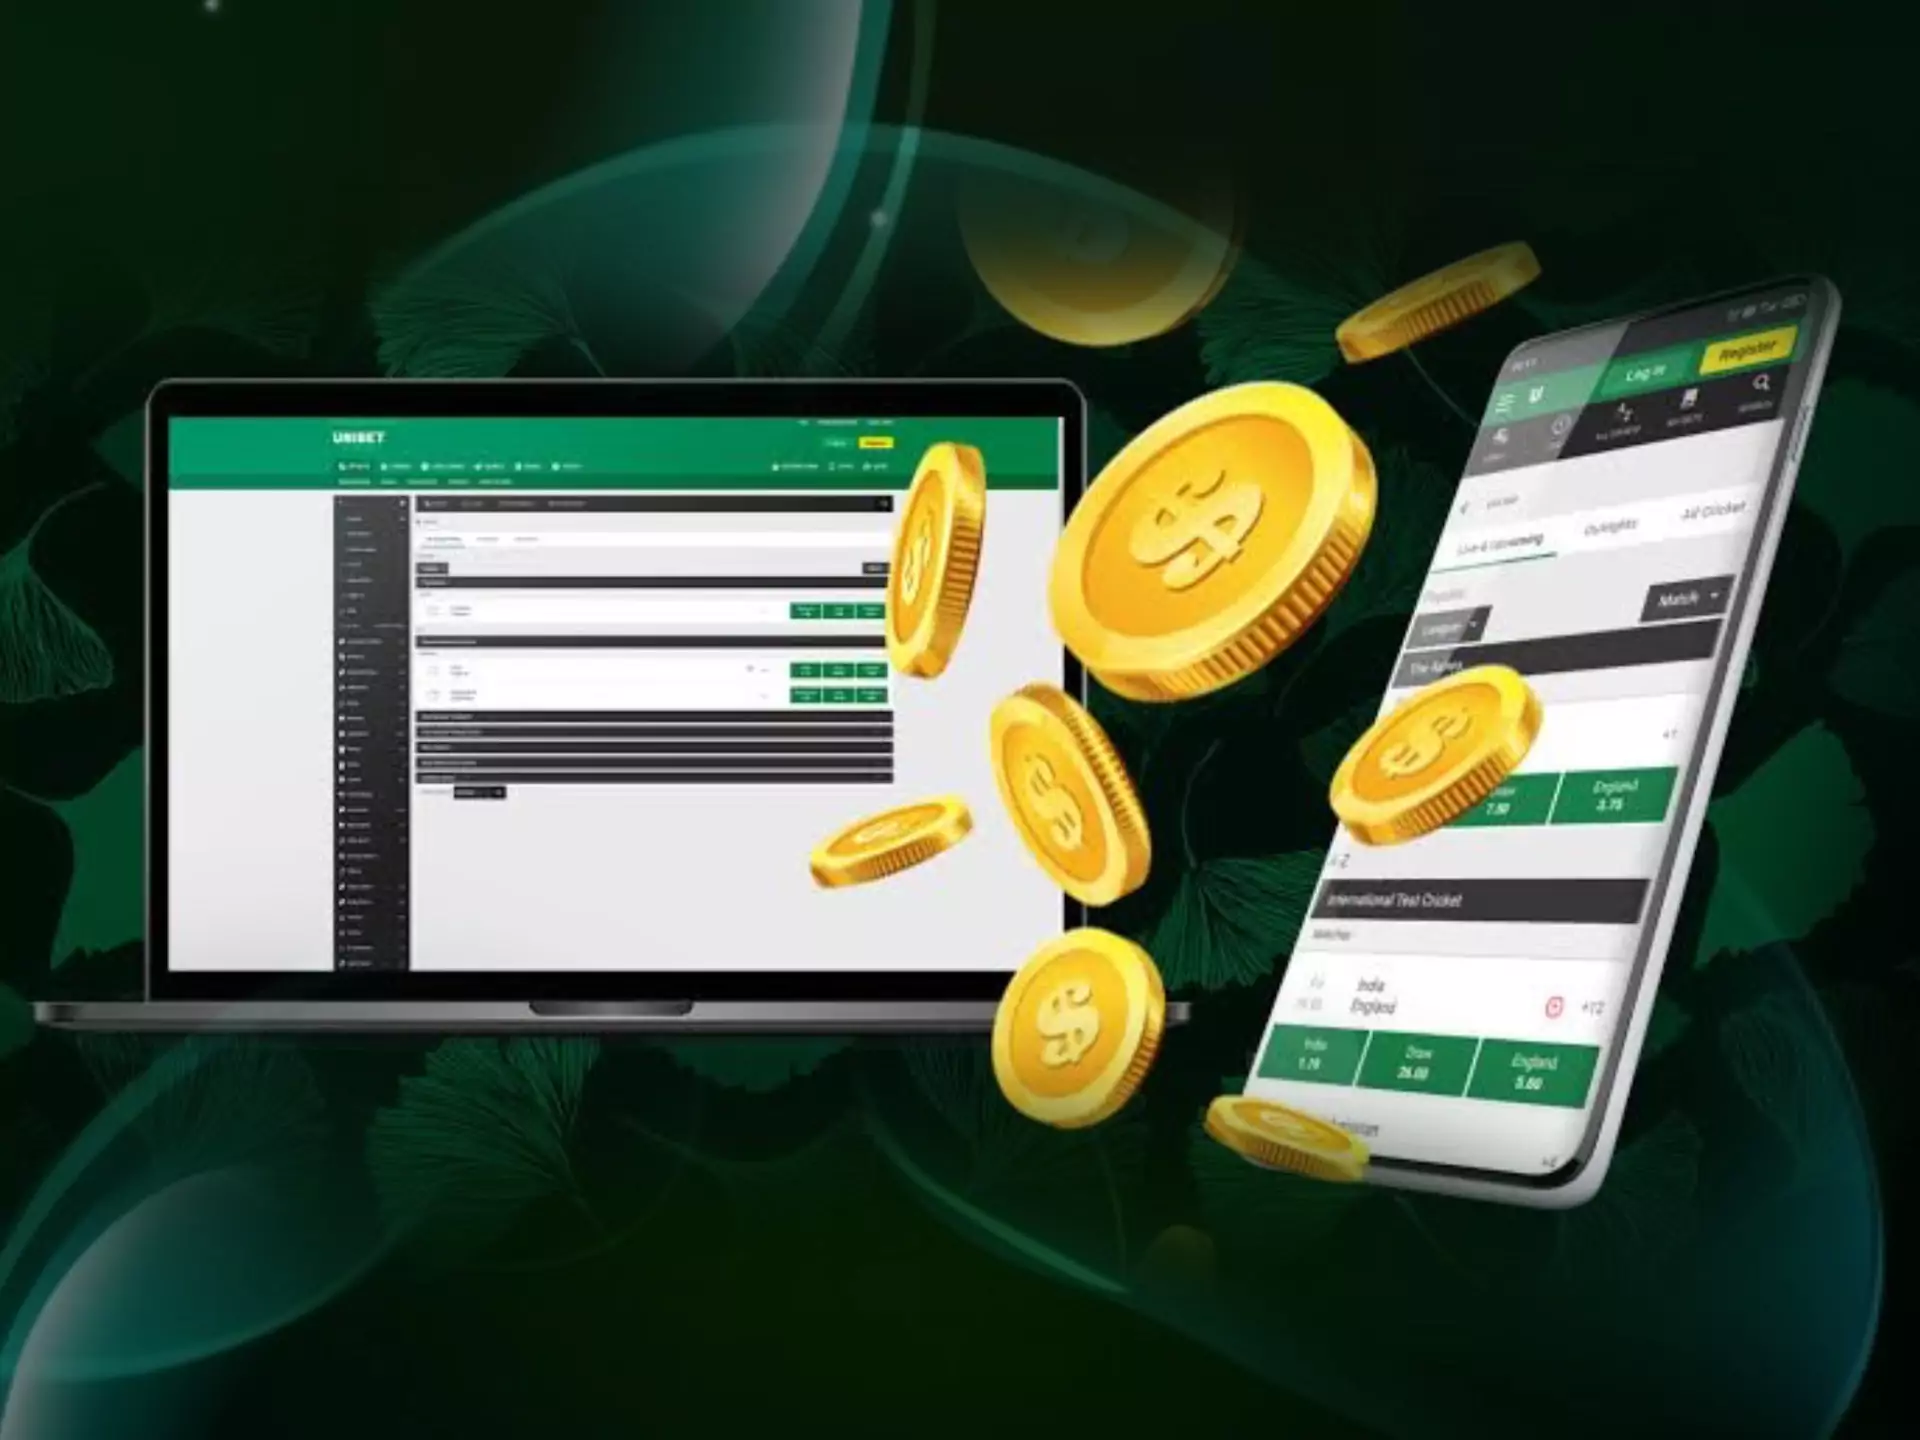 If you do not want to install any software, then Unibet mobile site is just for you.